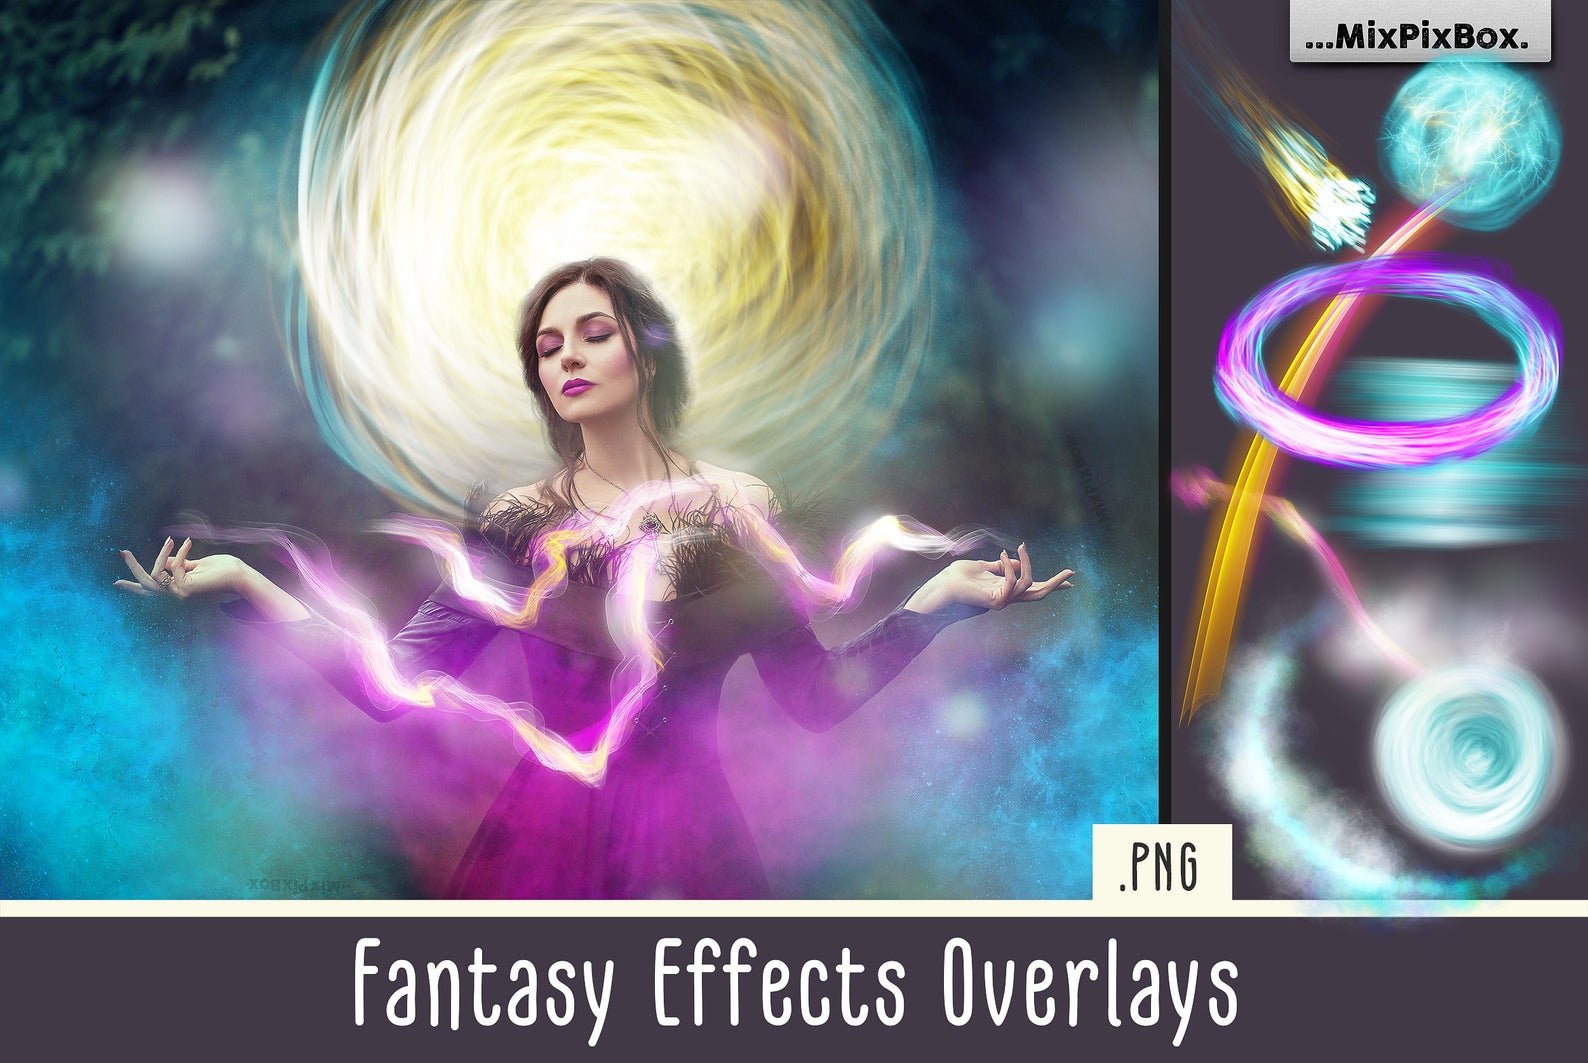 Fantasy Effects Overlayscover image.